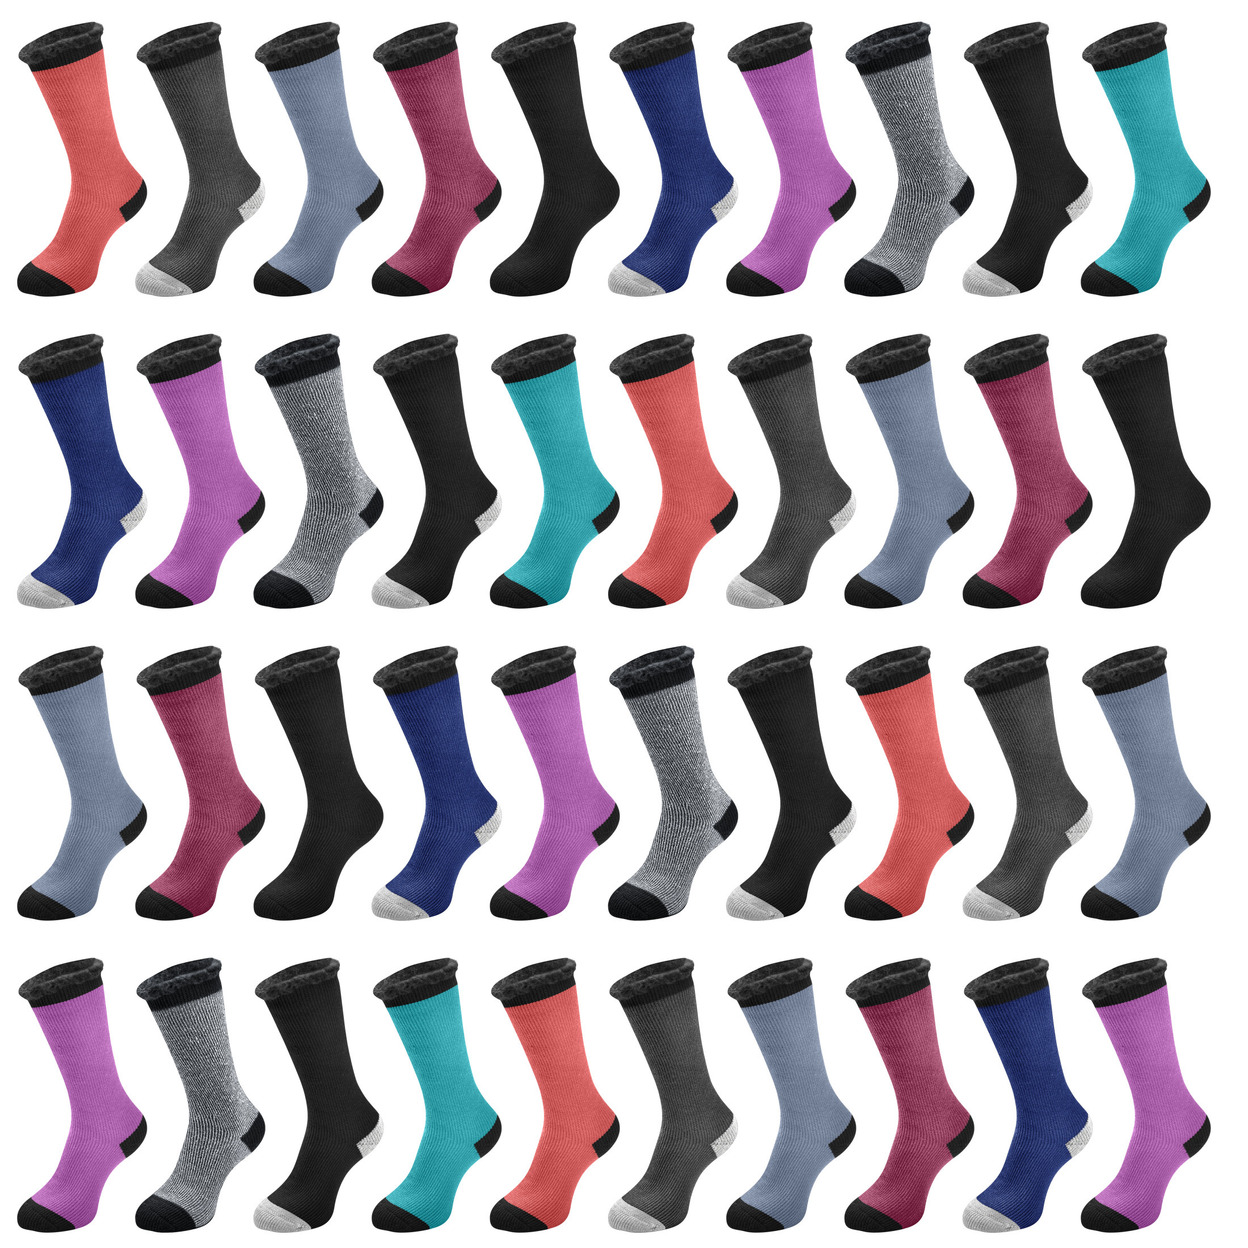 Multi-Pairs: Men's Thermal-Insulated Brushed Lined Warm Heated Winter Socks For Cold Weather - 3-pairs